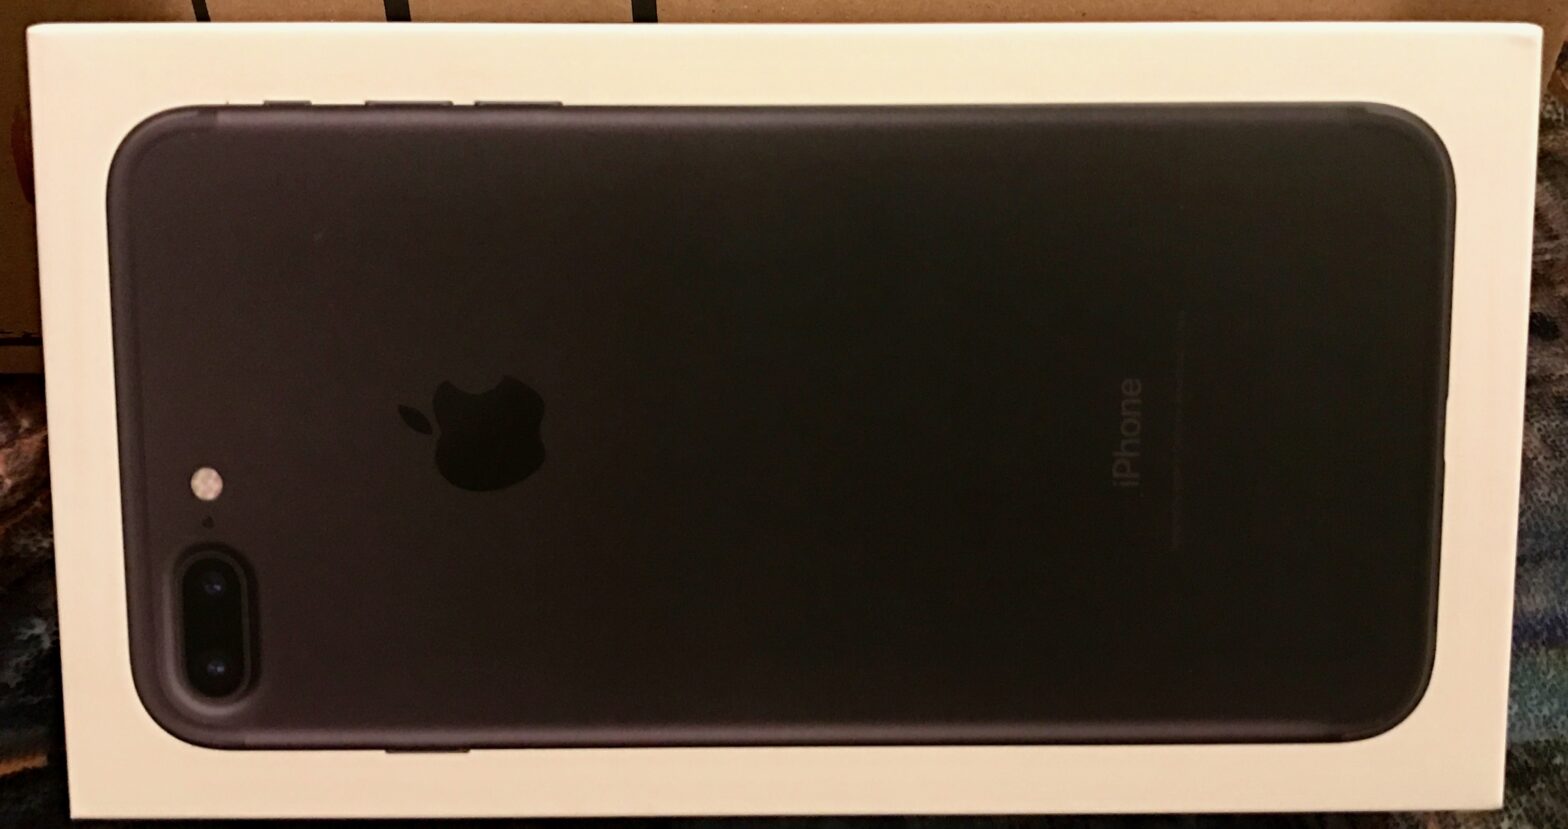 Upgrading from iPhone 6 Plus to iPhone 7 Plus